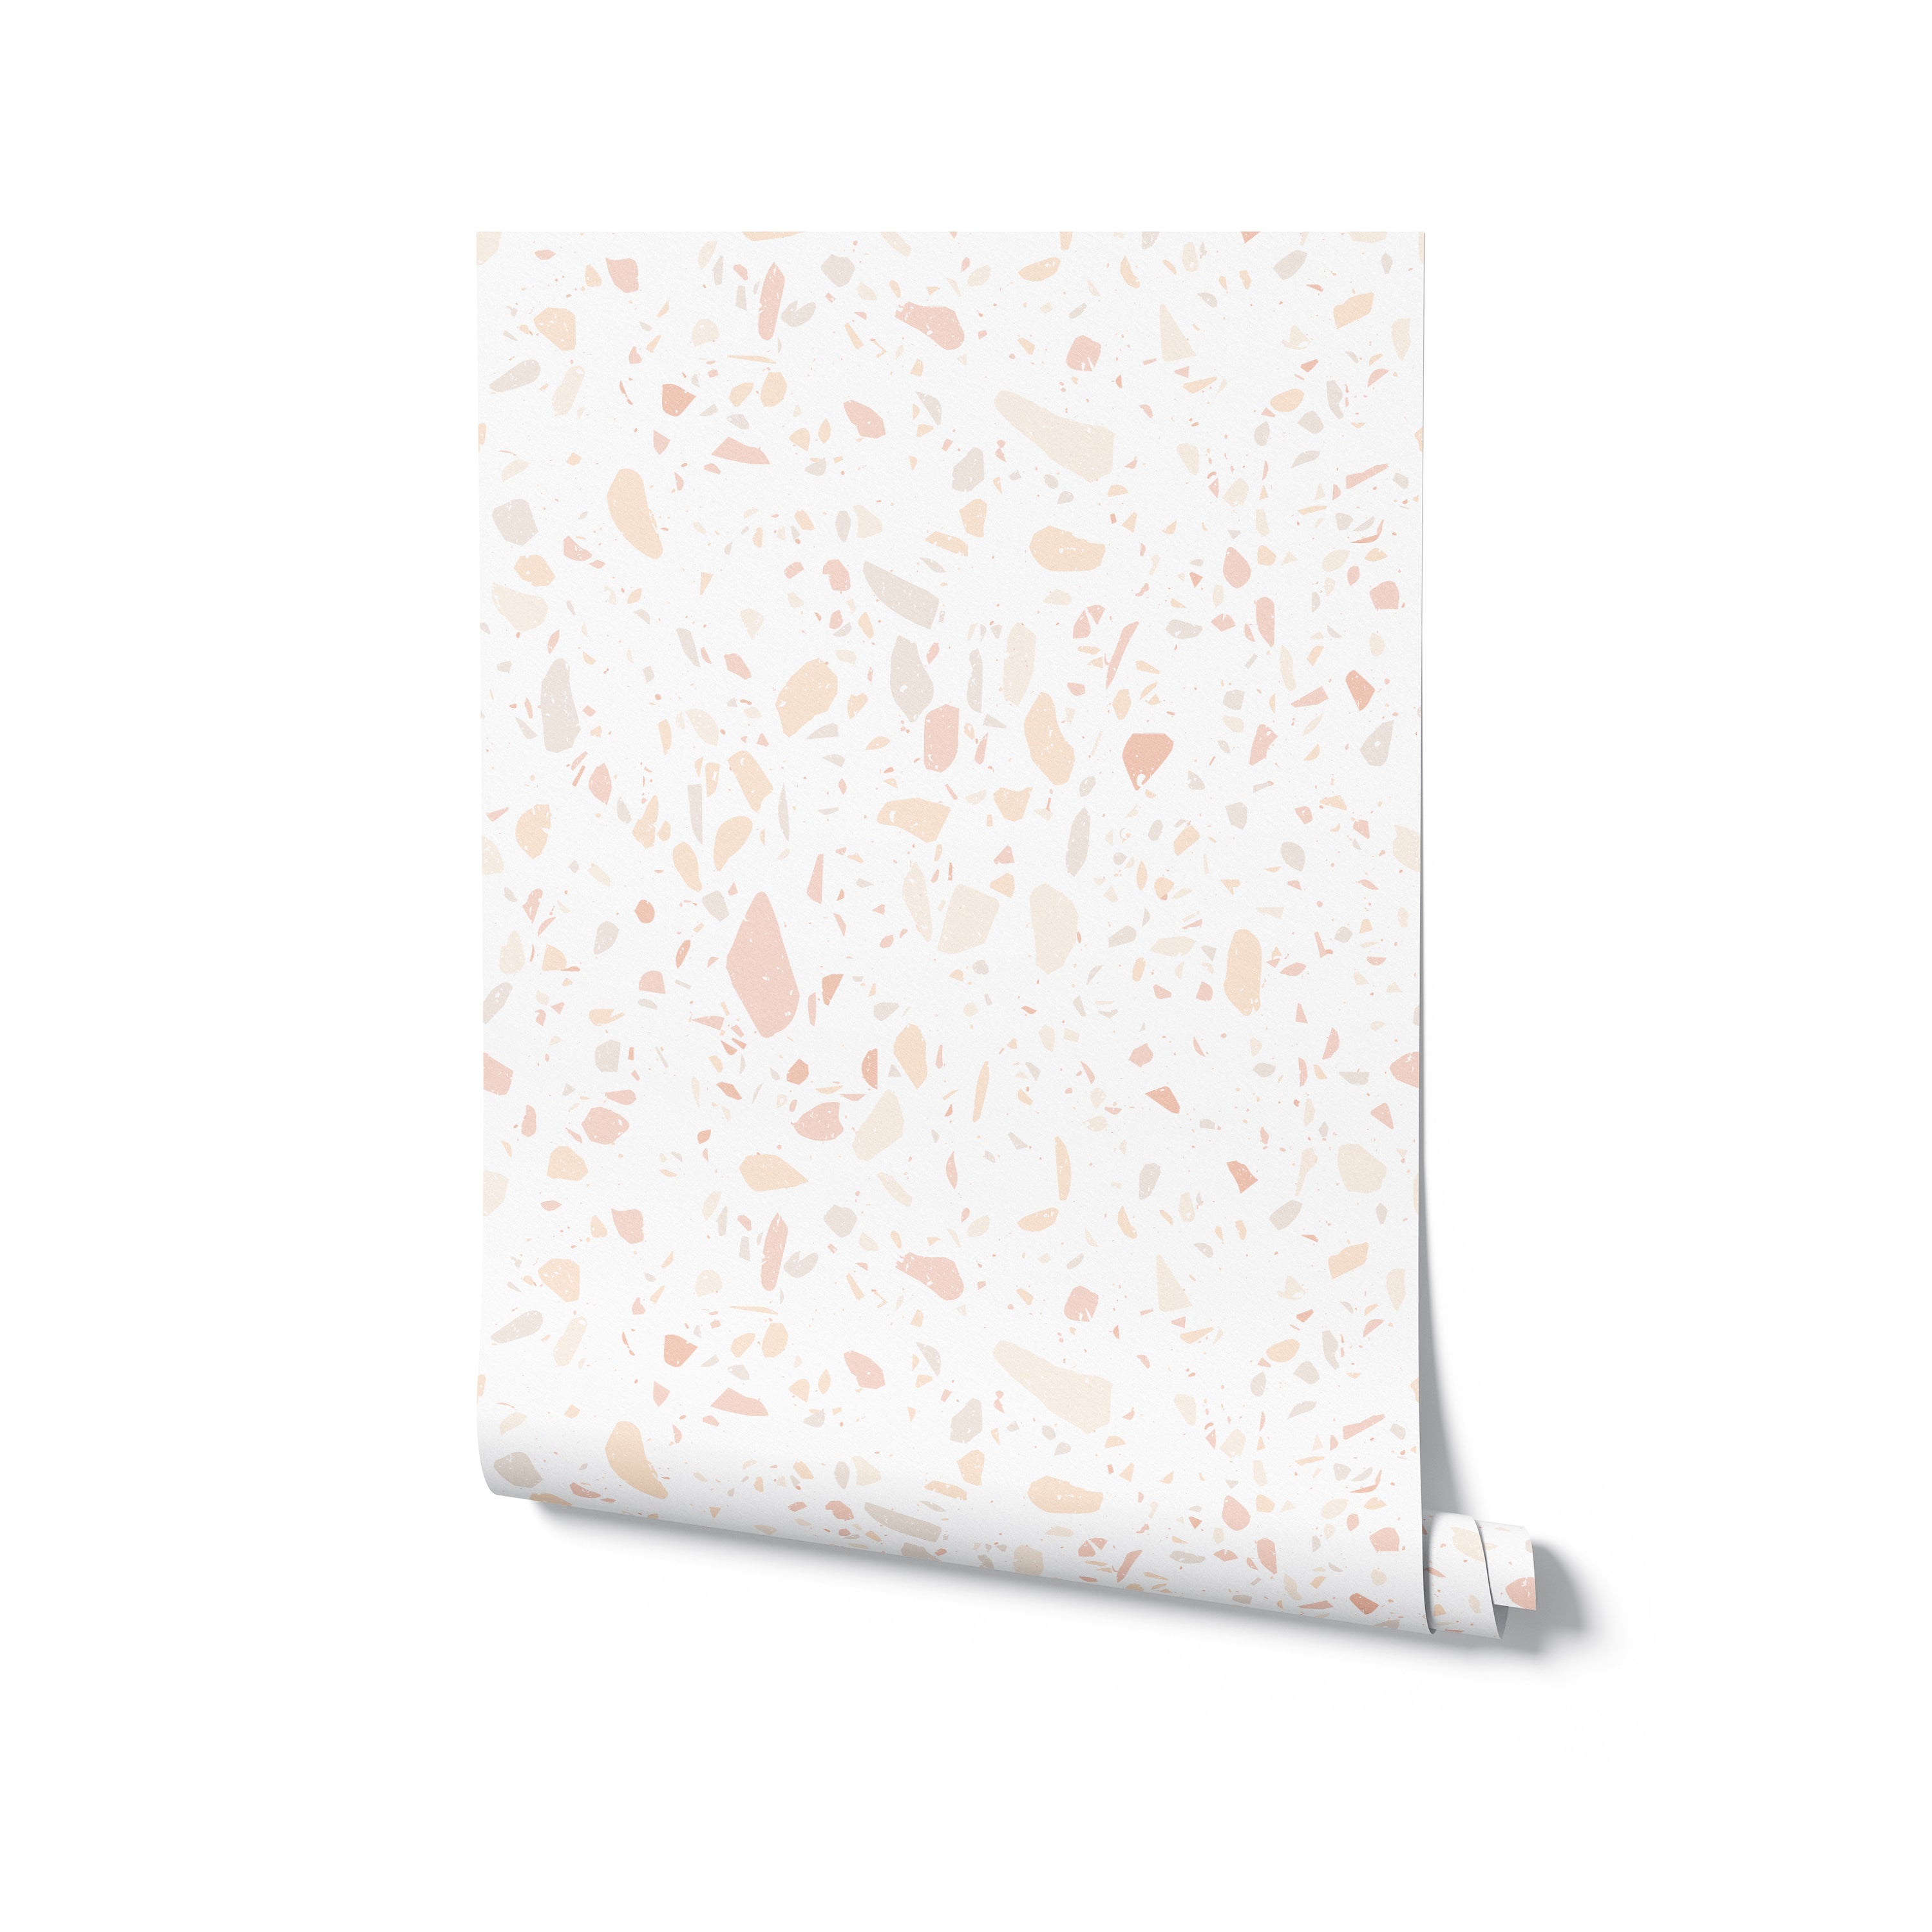 A roll of Pink Terrazzo Wallpaper displaying its full pattern. The wallpaper consists of a light base speckled with soft pink, cream, and gray fragments, offering a modern and versatile design suitable for various spaces in the home.